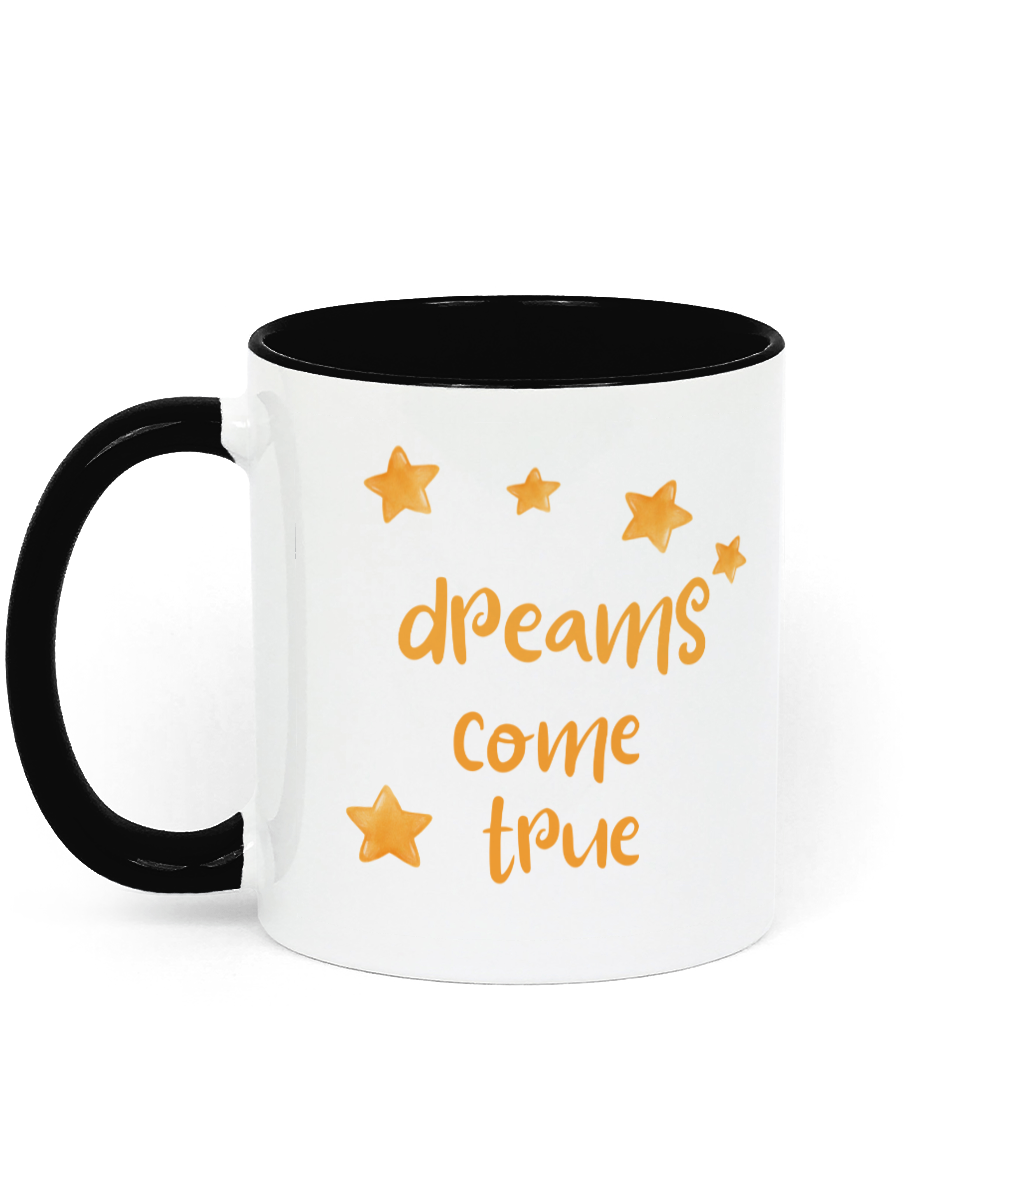 Dreams Come True 11 oz mug. Daily Affirmations, Empowering, Motivation, Inspiration. Perfect Gift. Two-Toned. Black.